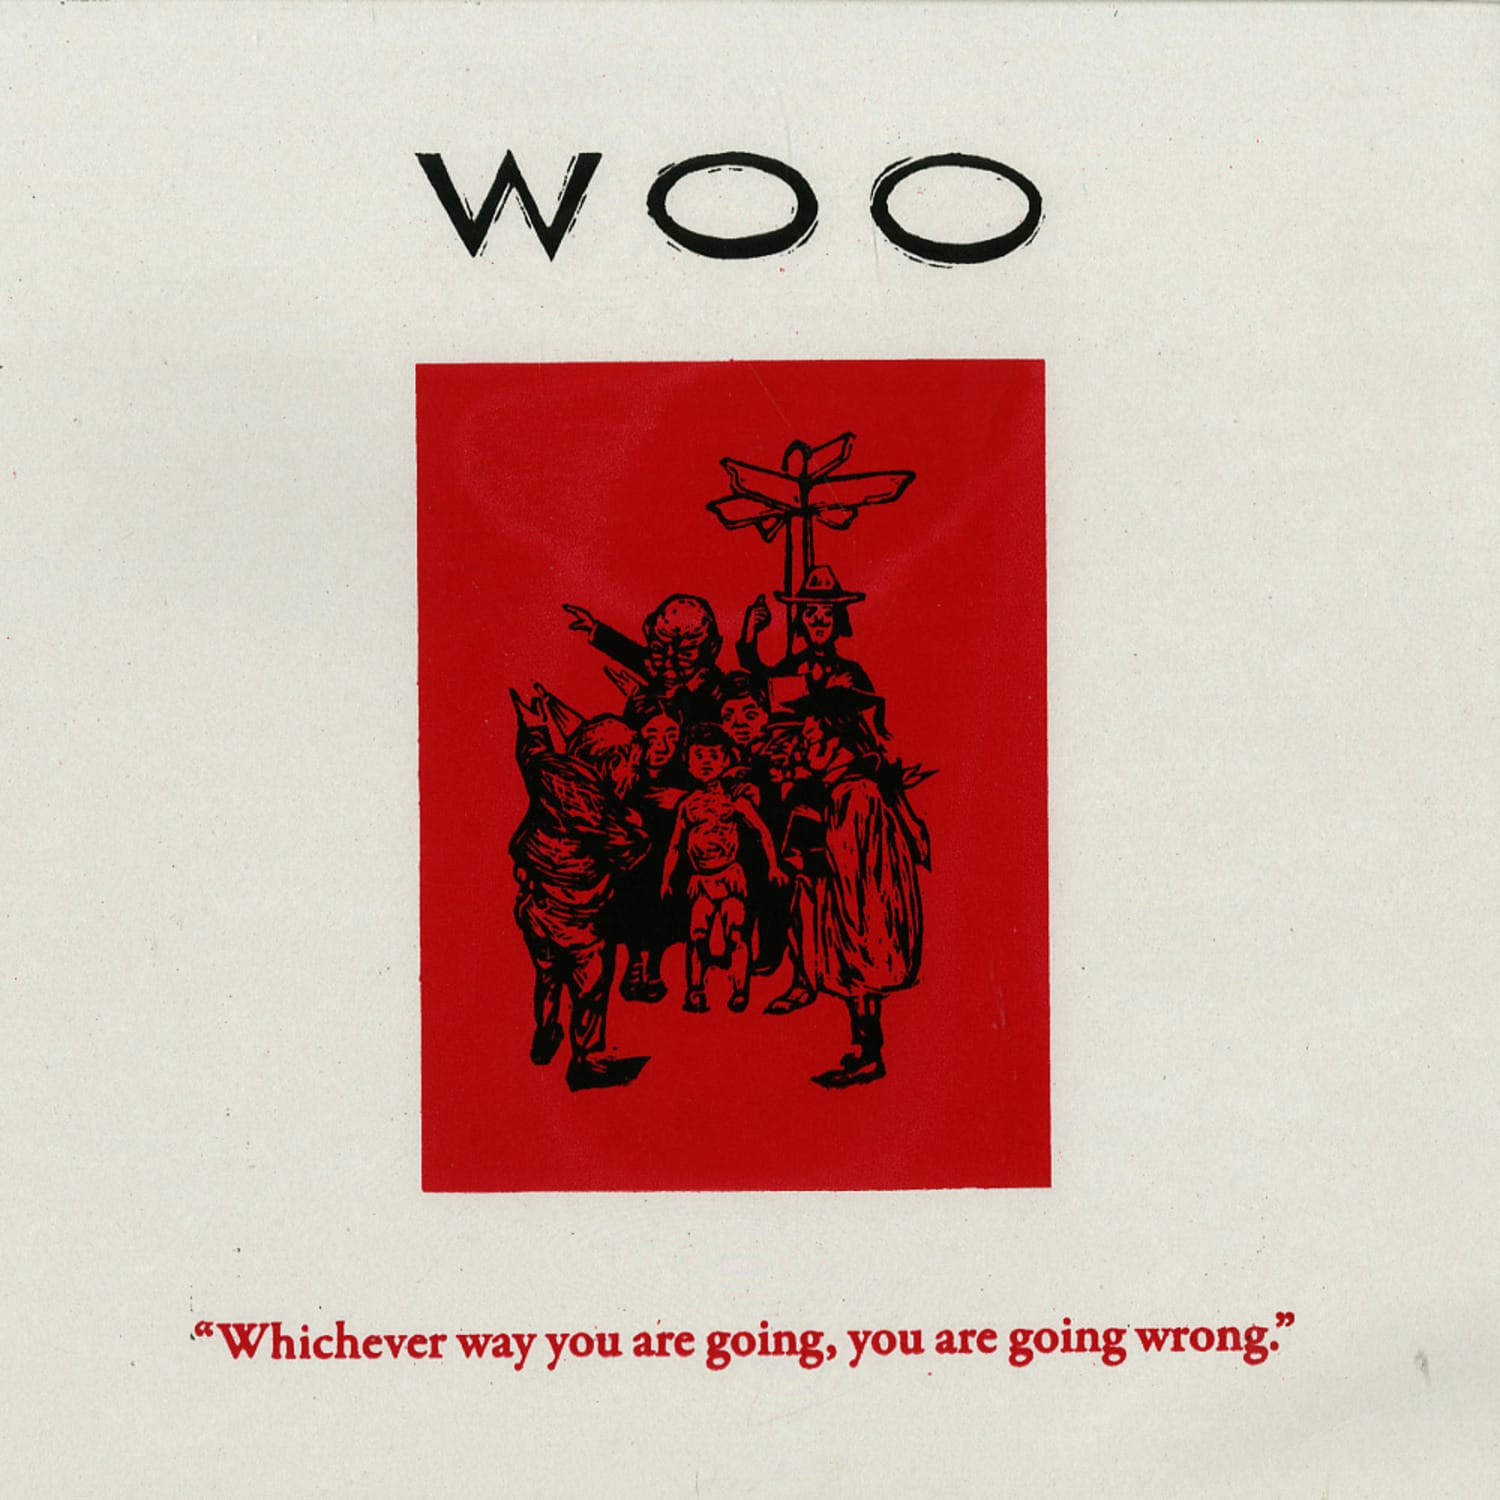 Woo - WHICHEVER WAY YOU ARE GOING, YOU ARE GOING WRONG